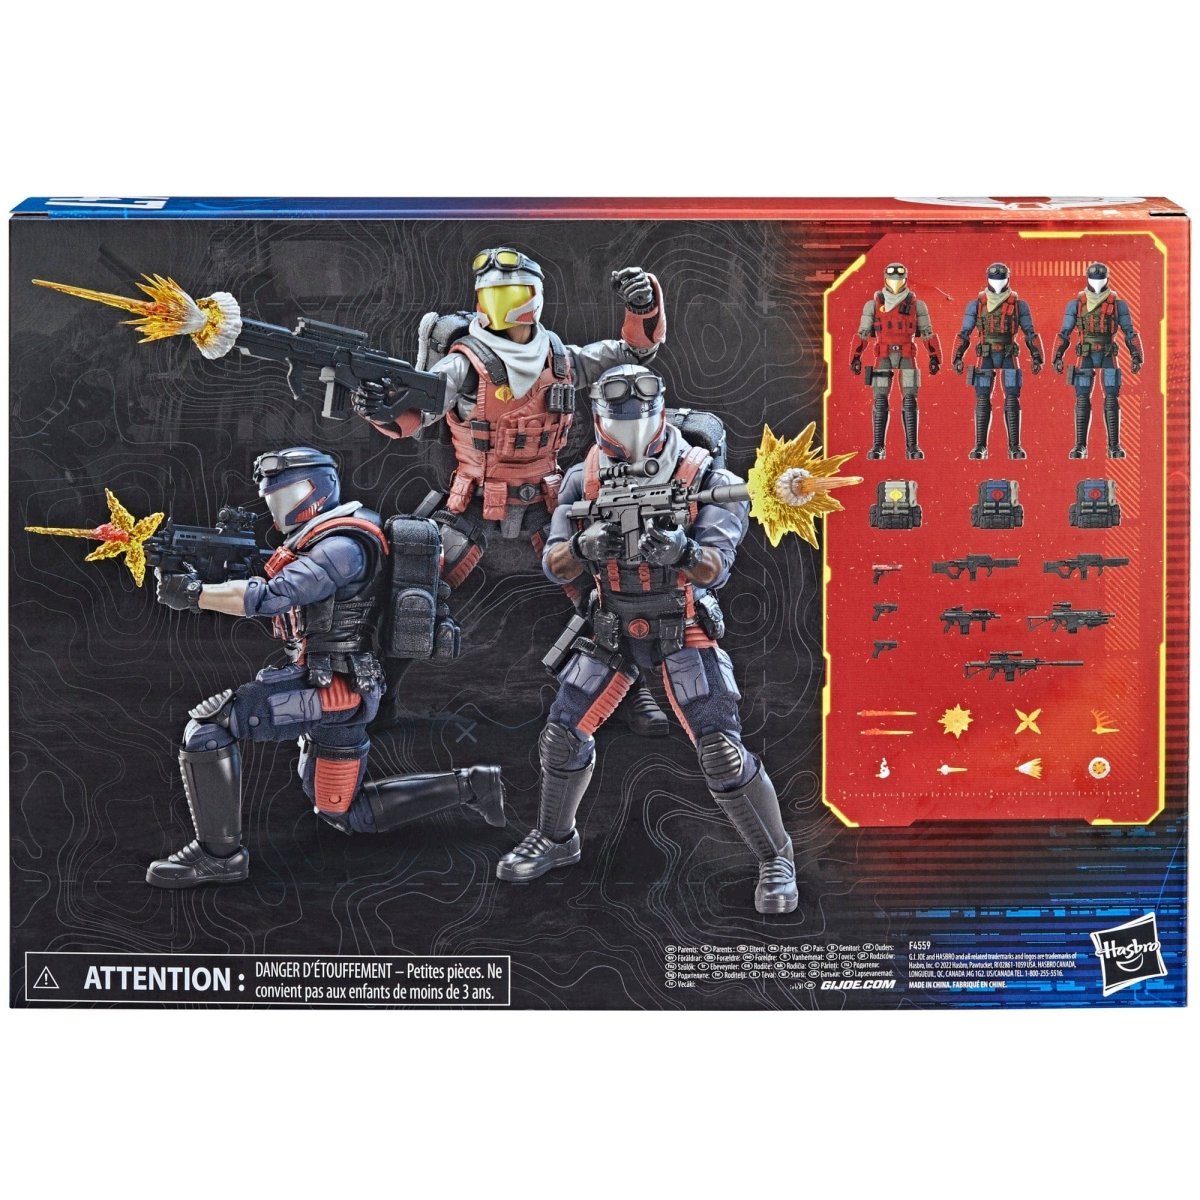 G.I. Joe Classified Series Cobra Viper Officer & Vipers Action Figures Pop-O-Loco